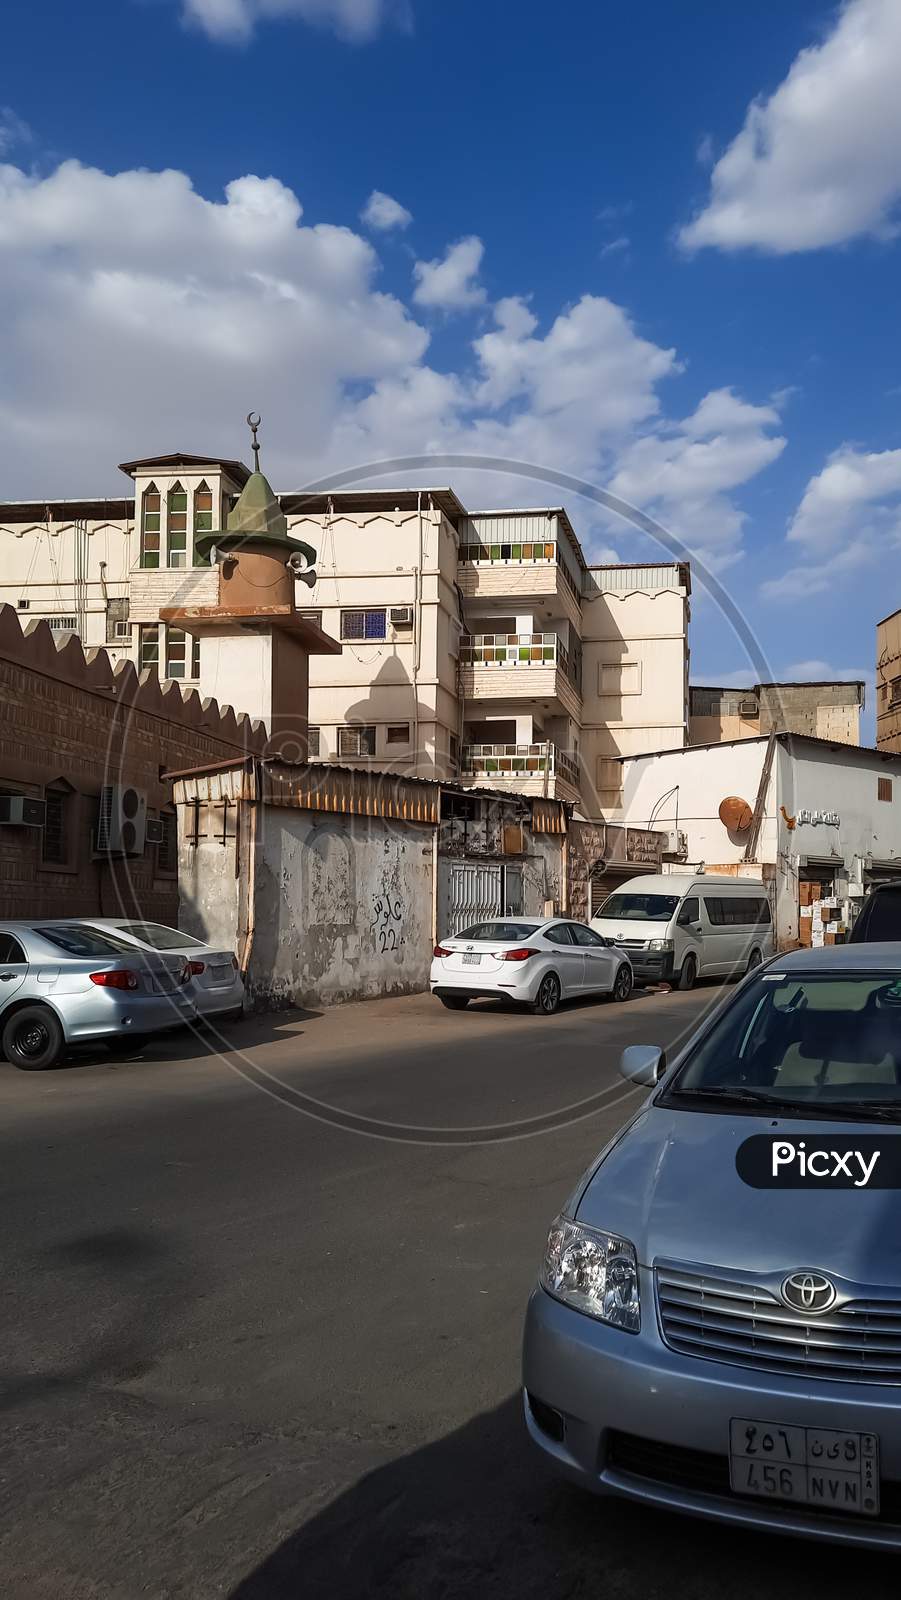 Beautiful buildings and cloudy blue sky and cars on road old city,April,27,2021.